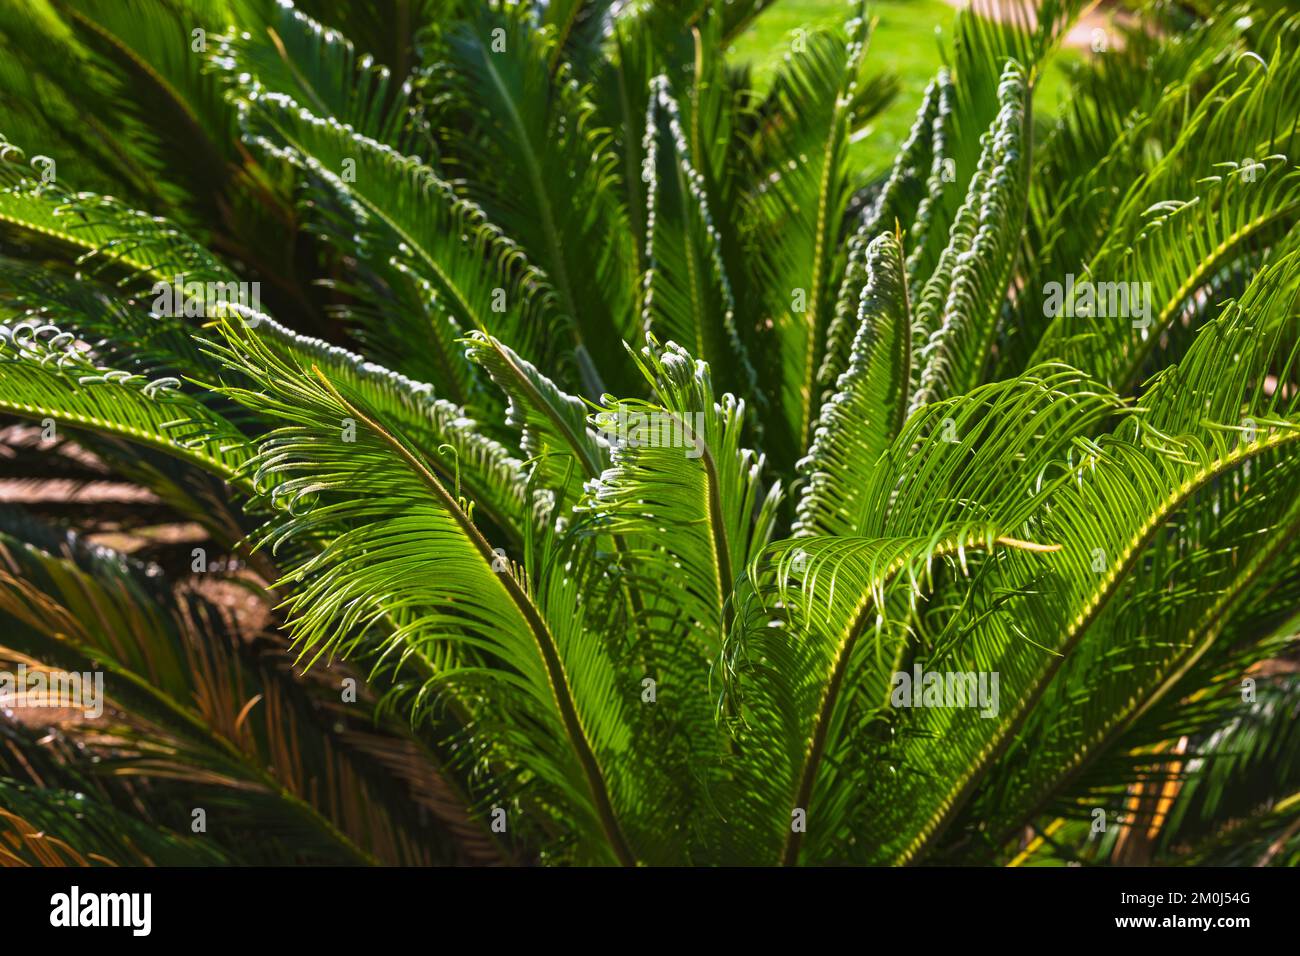 Cycas Revoluta or Sago Palm or Japenese Cycad plant. Decorative plants for parks or gardens. Stock Photo